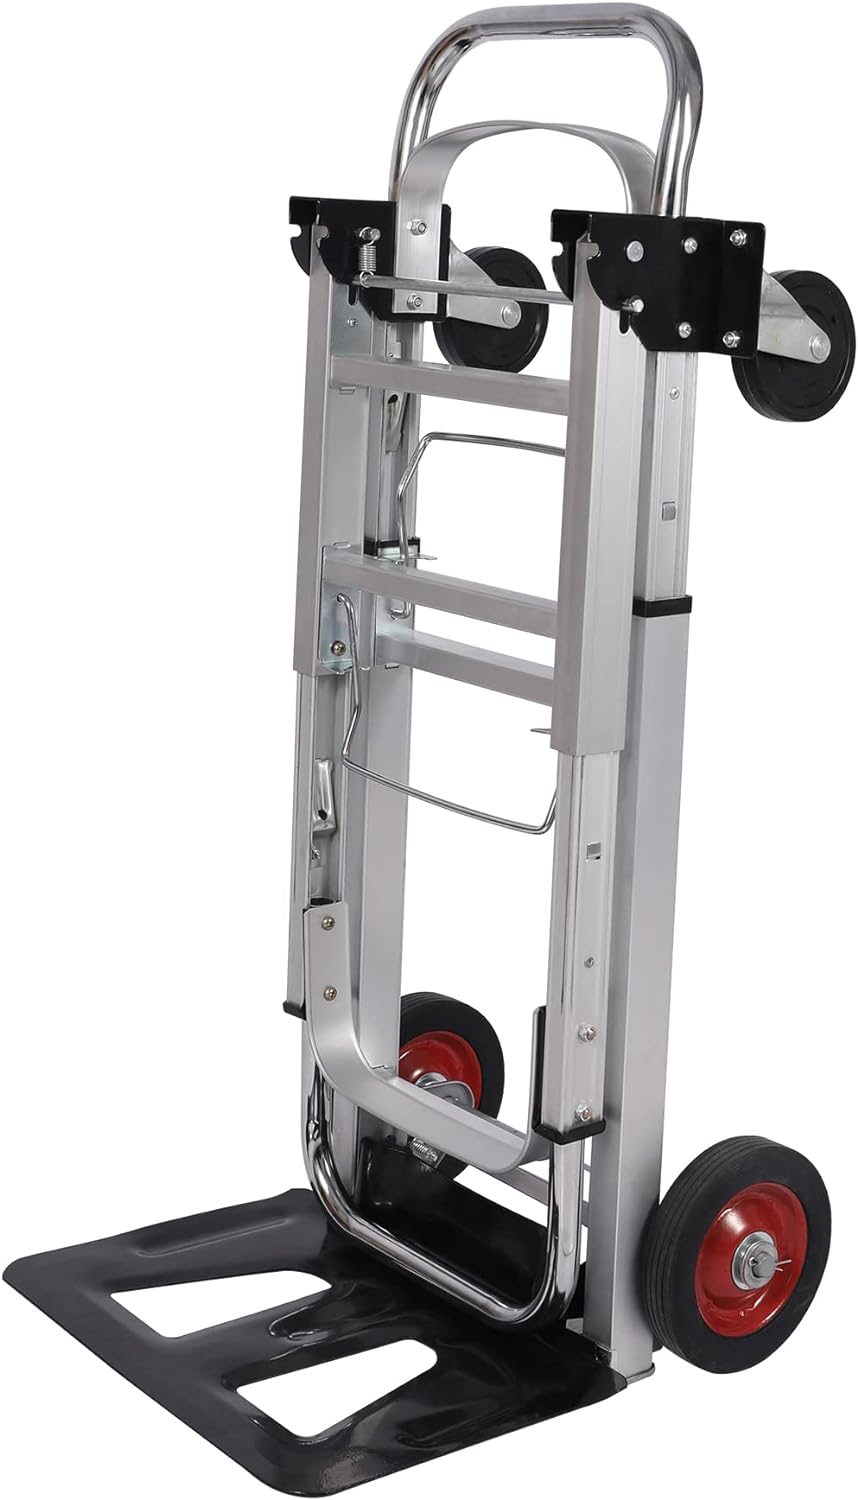 REDSWING 2 in 1 Aluminum Hand Truck and Dolly, Convertible Portable Hand Cart with Wheels, Heavy Duty Handtruck Flatform Cart, 330lbs We